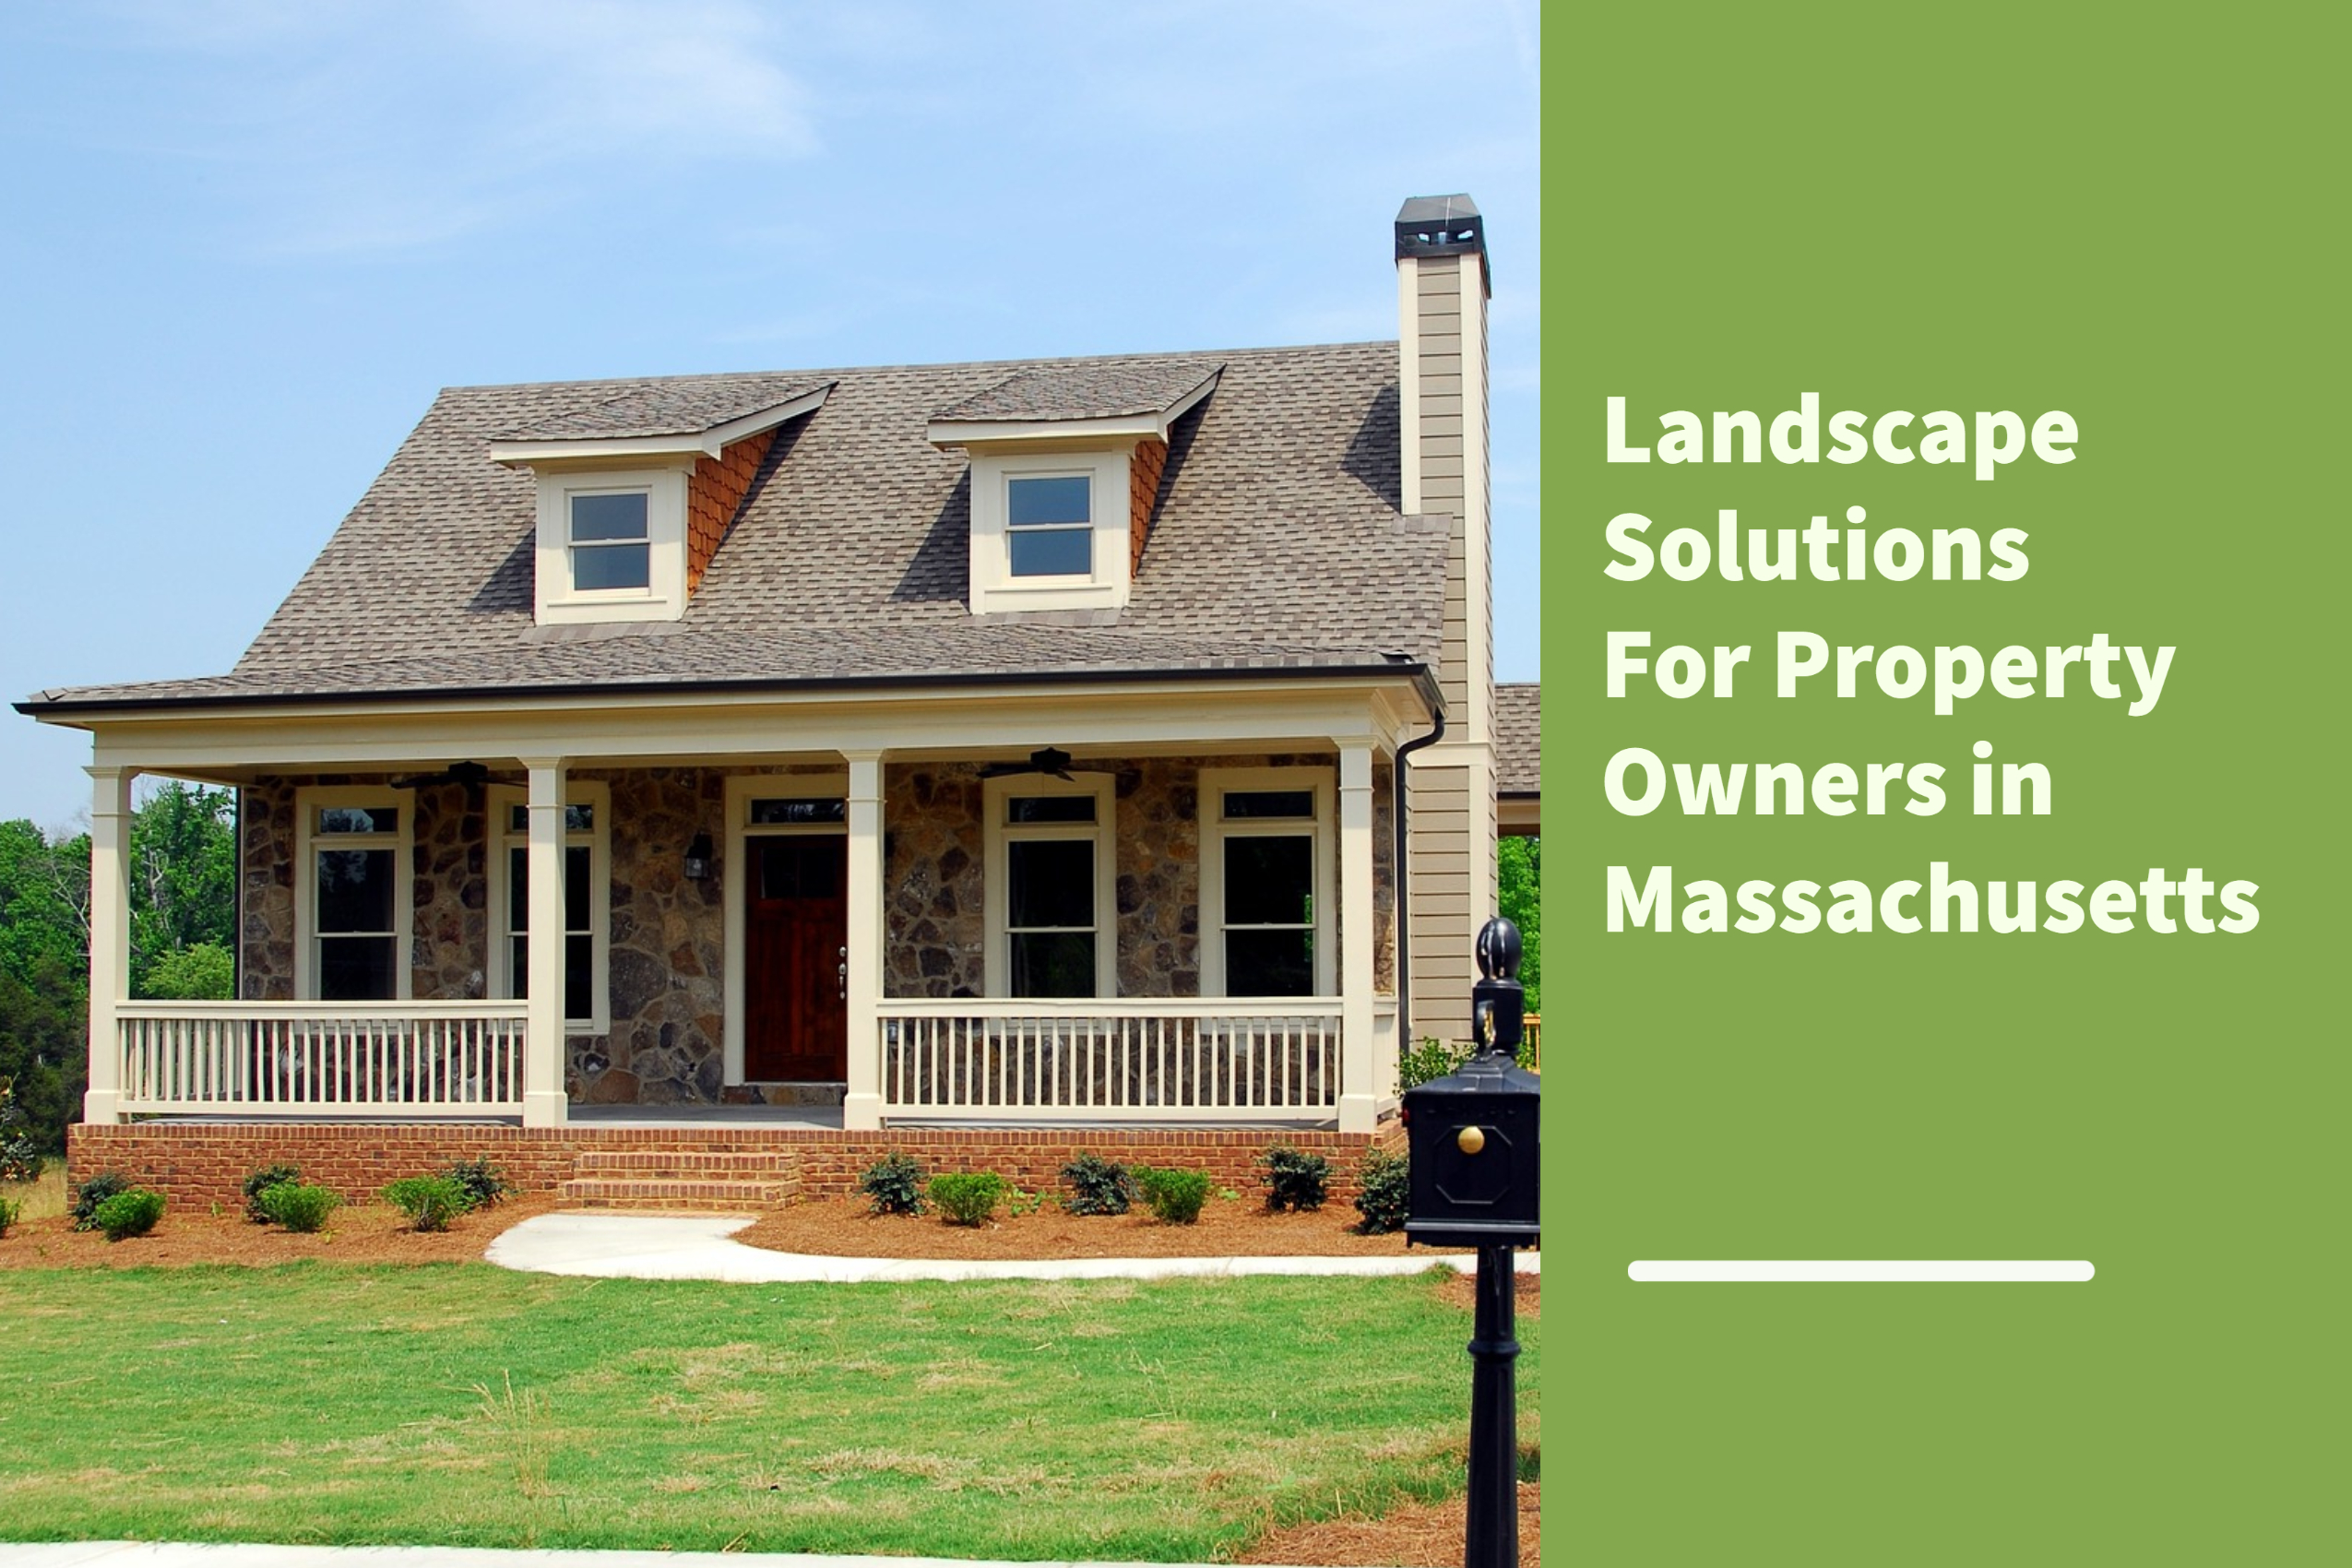 Landscape Solutions For Property Owners in Massachusetts